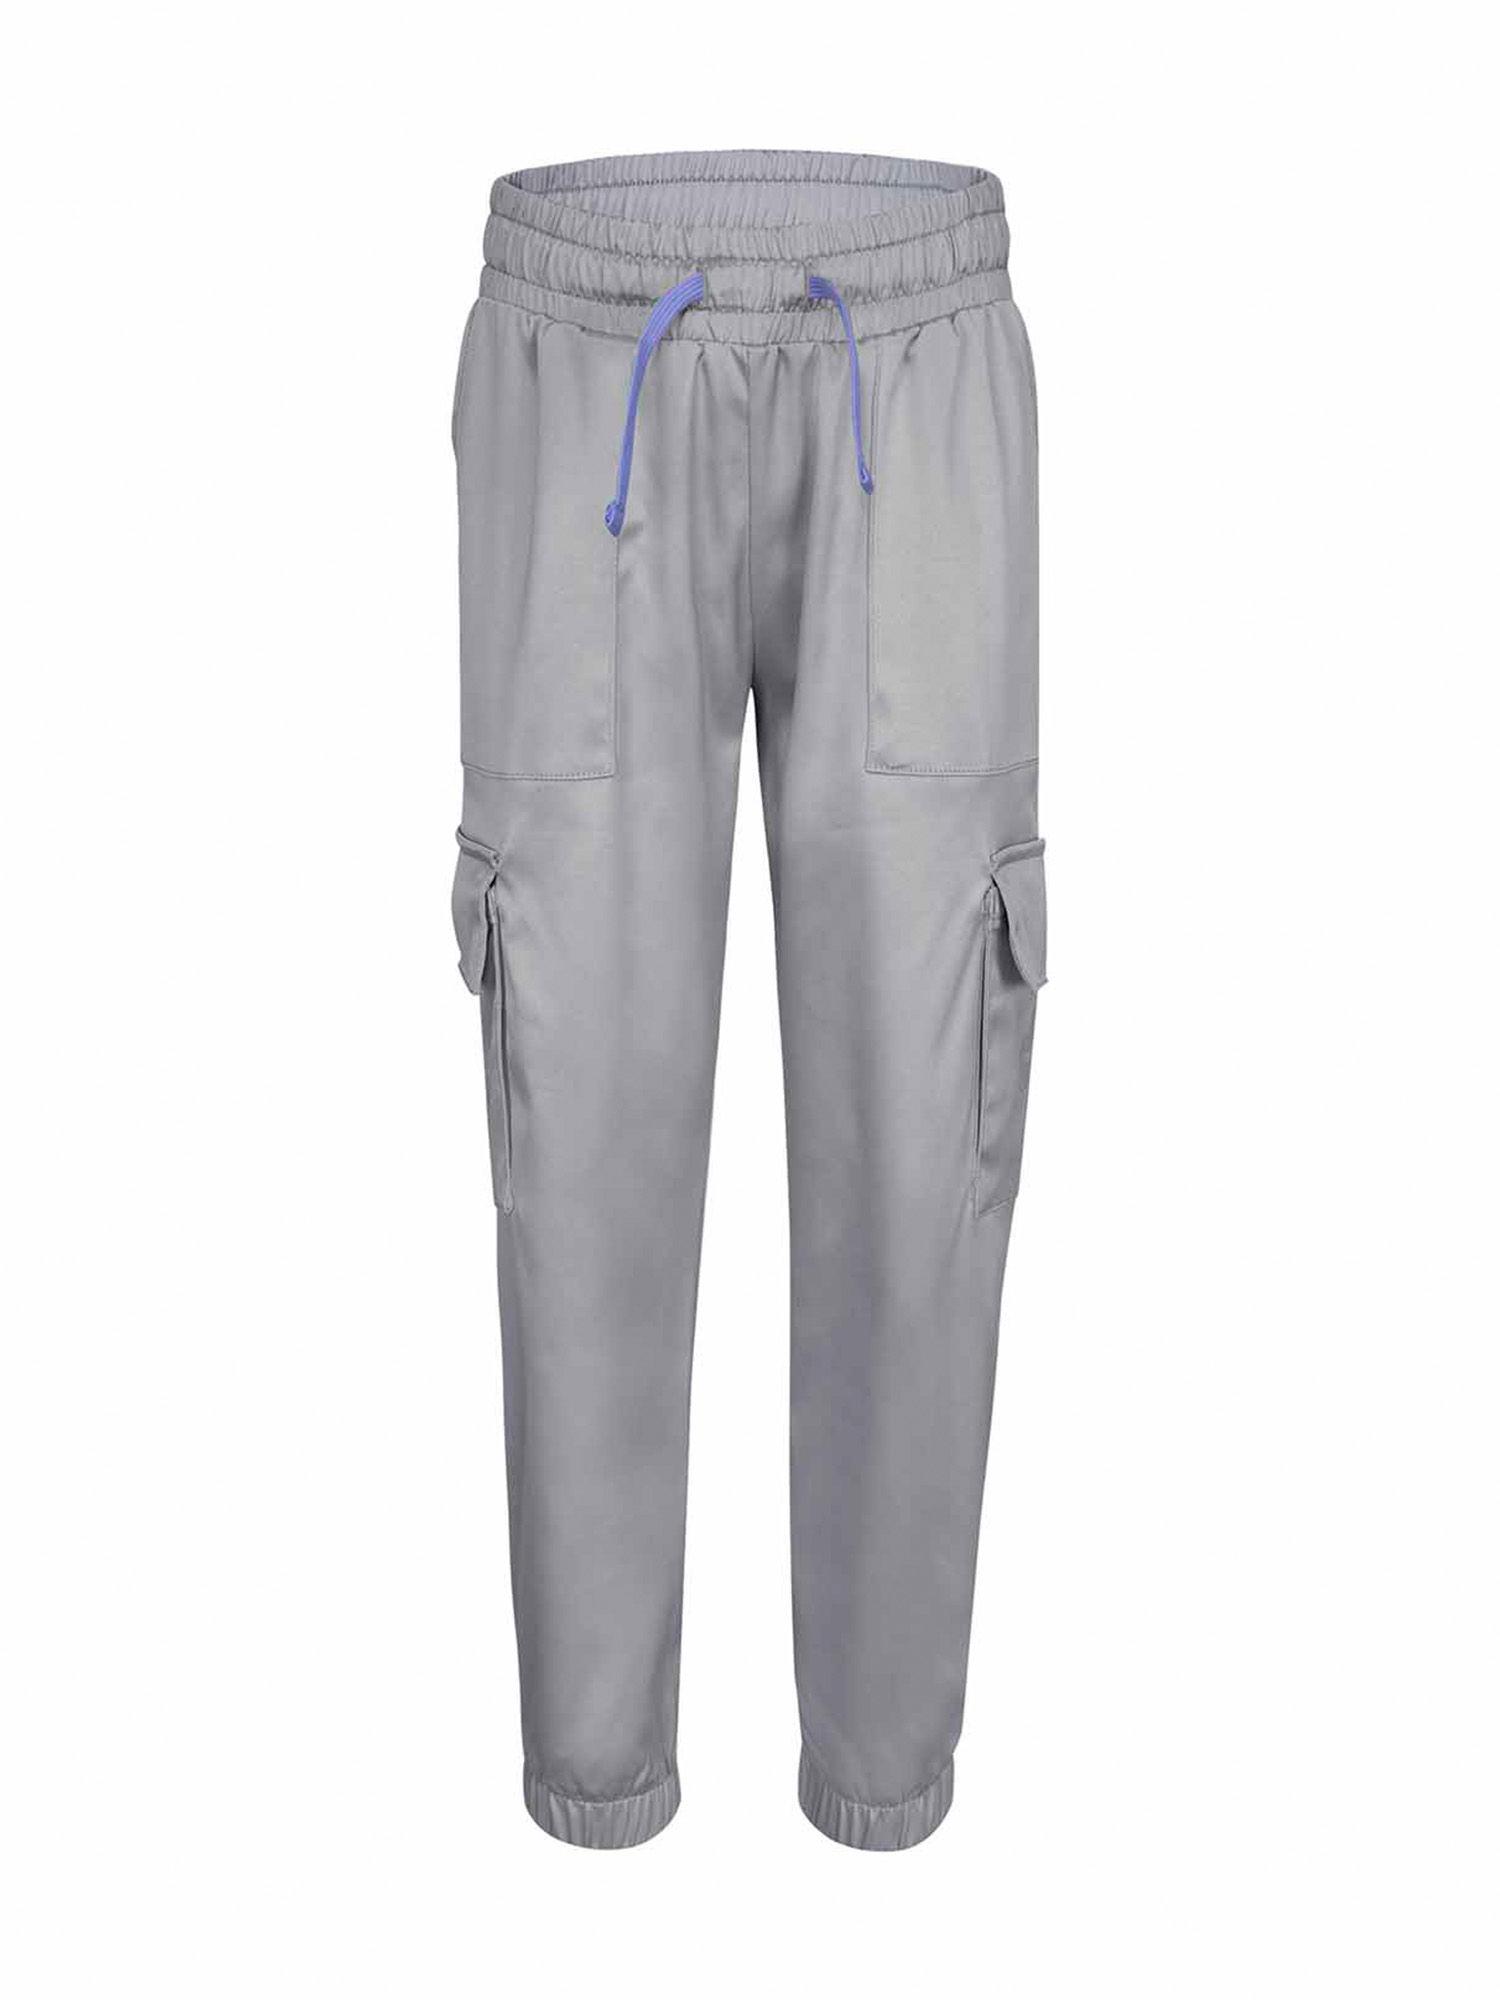 girls-grey-solid-joggers